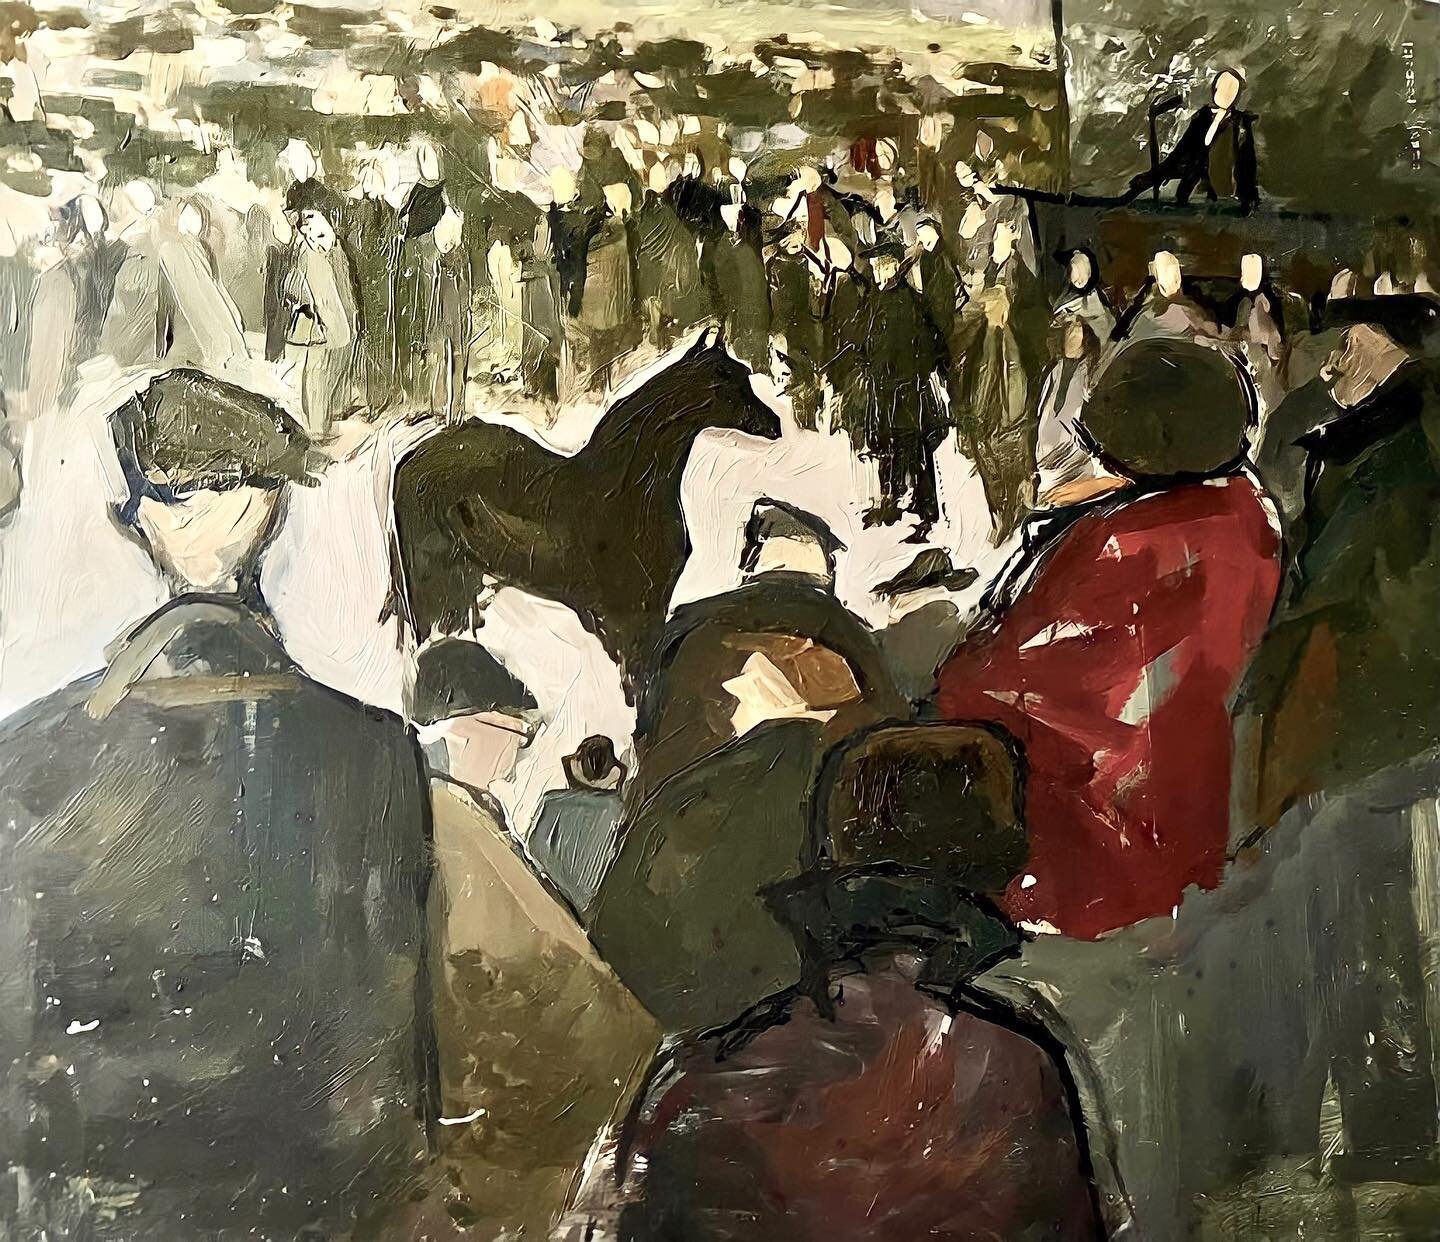 Our &lsquo;Orkney &amp; The Scottish Islands&rsquo; exhibition ends this weekend. Please visit fettesfineart.com to view the remaining collection of works, including the stunning &lsquo;Island Horse Sale&rsquo; by The Scottish School. Join our mailin